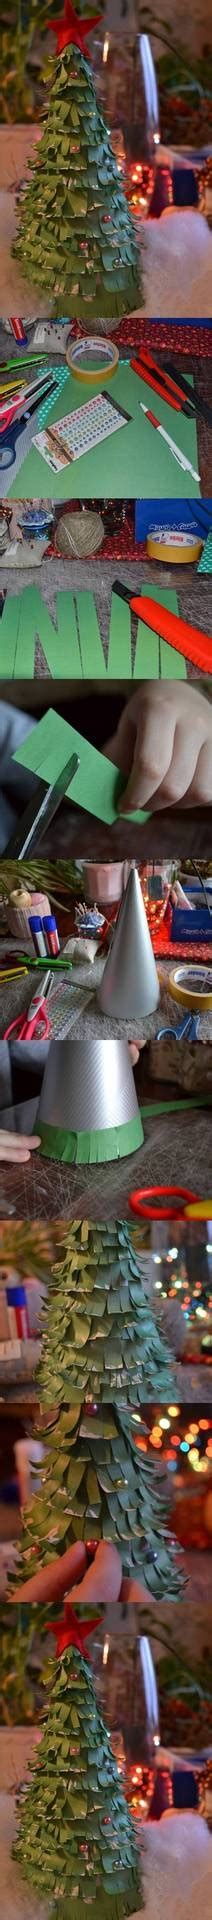 Diy Construction Paper Christmas Tree Pictures Photos